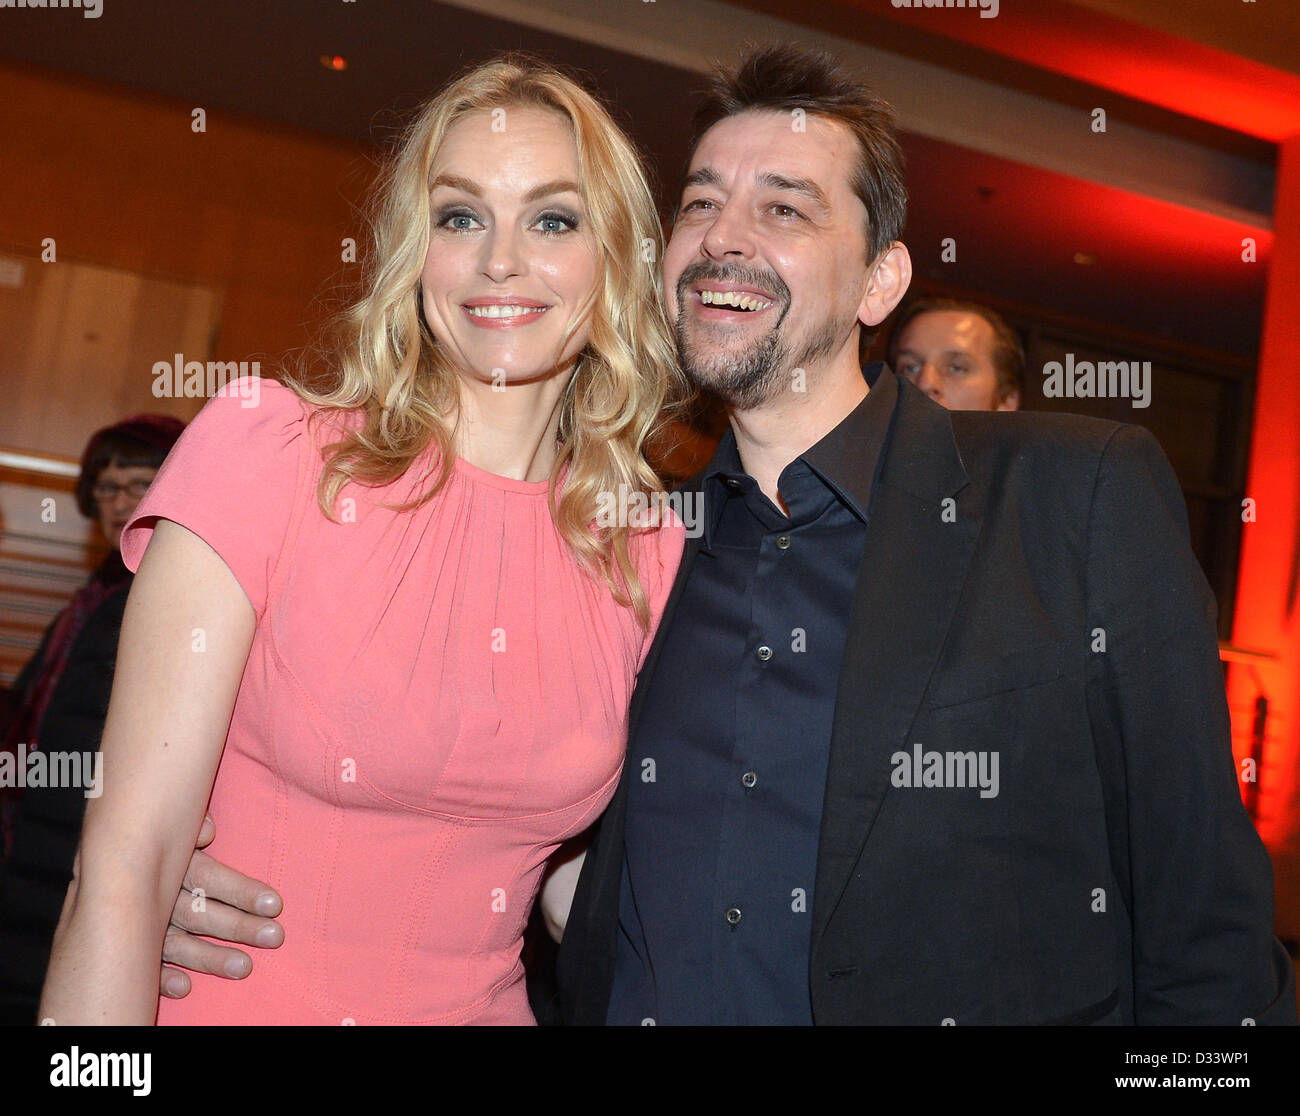 German actress Nina Hoss and her partner Alex Silva Jupiter attend the opening party after the premiere of the movie 'The Grandmaster' ('Yi dai zong shi') during the 63rd annual Berlin International Film Festival, in Berlin, Germany, 07 February 2013. The movie has been selected as the opening film for the Berlinale and is running in the offical section out of competition. Photo: Britta Pedersen/dpa Stock Photo